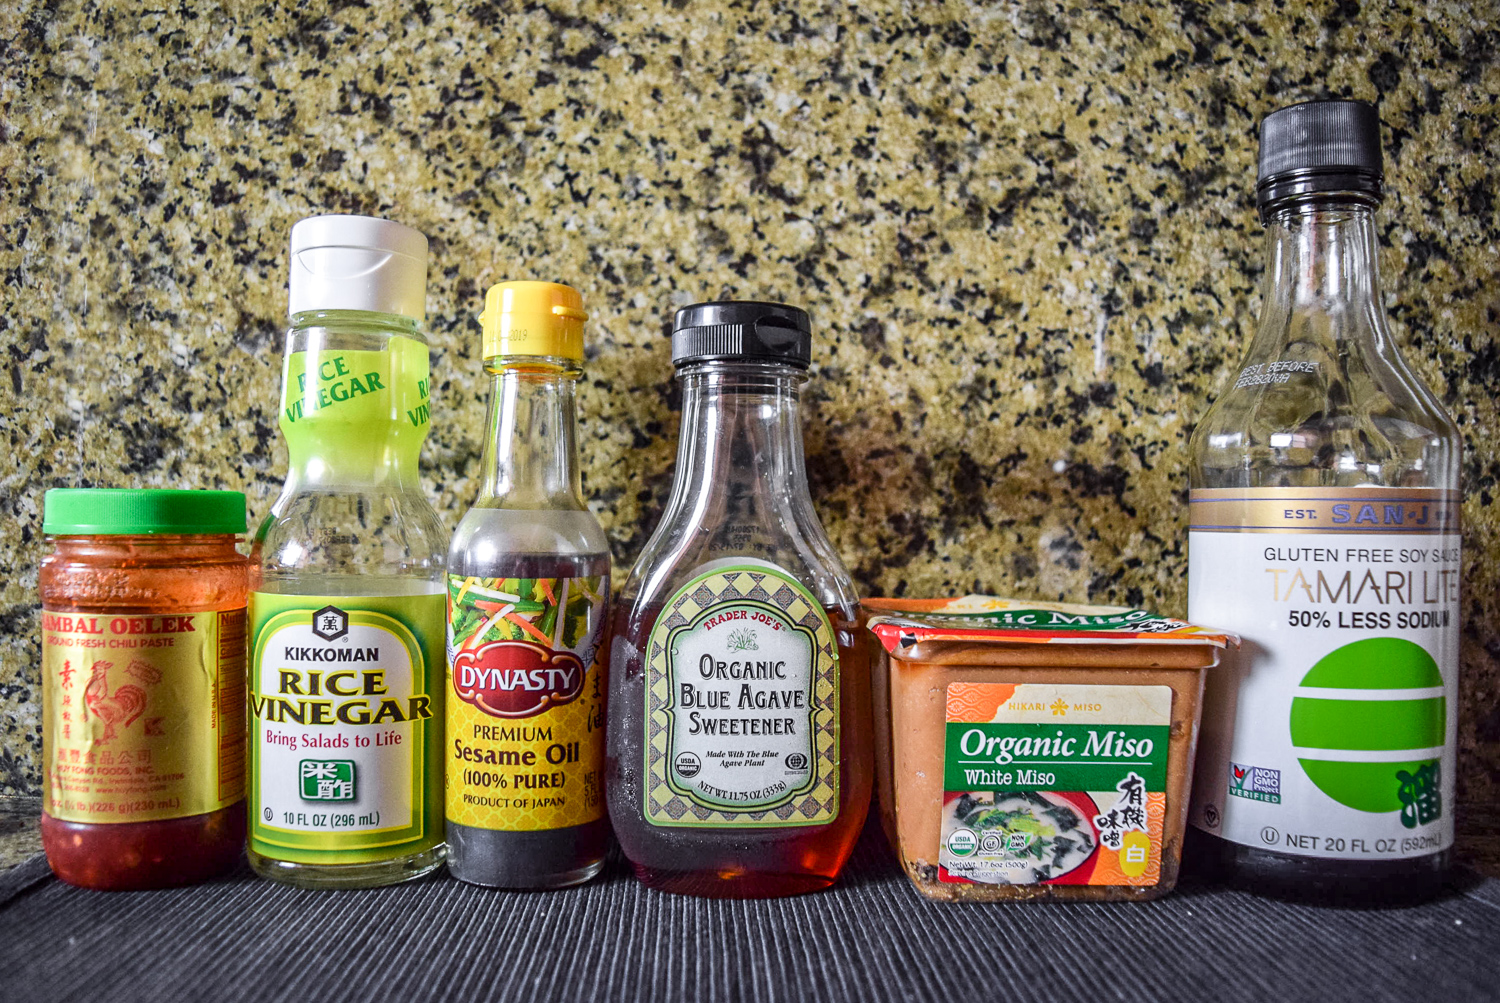 Ingredients for chili miso sauce